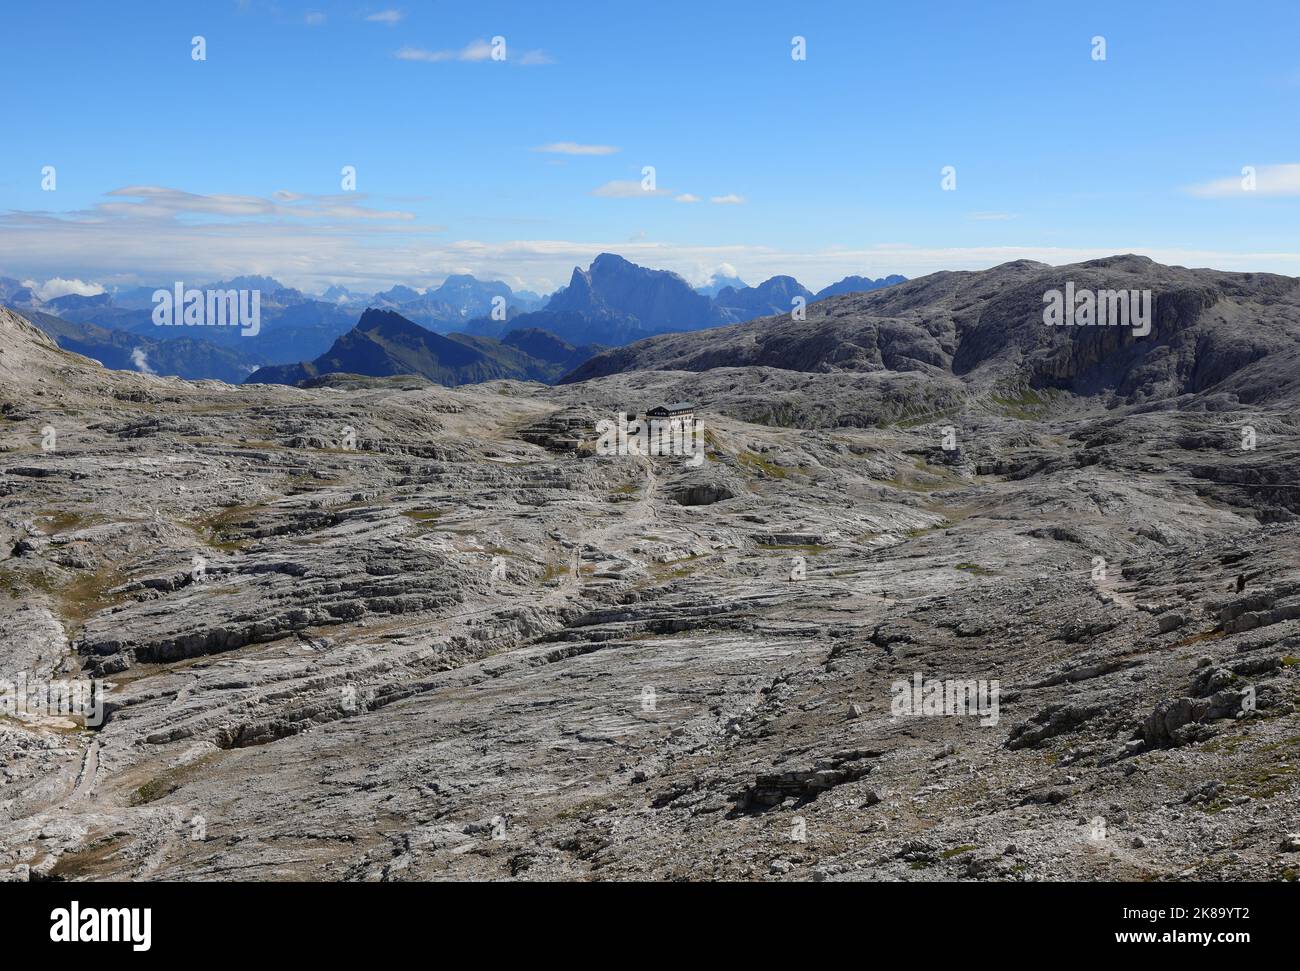 panorama of the dolomites and italian alps mountains from the summit of mount Rosetta Above the town of San martino di Castrozza Stock Photo